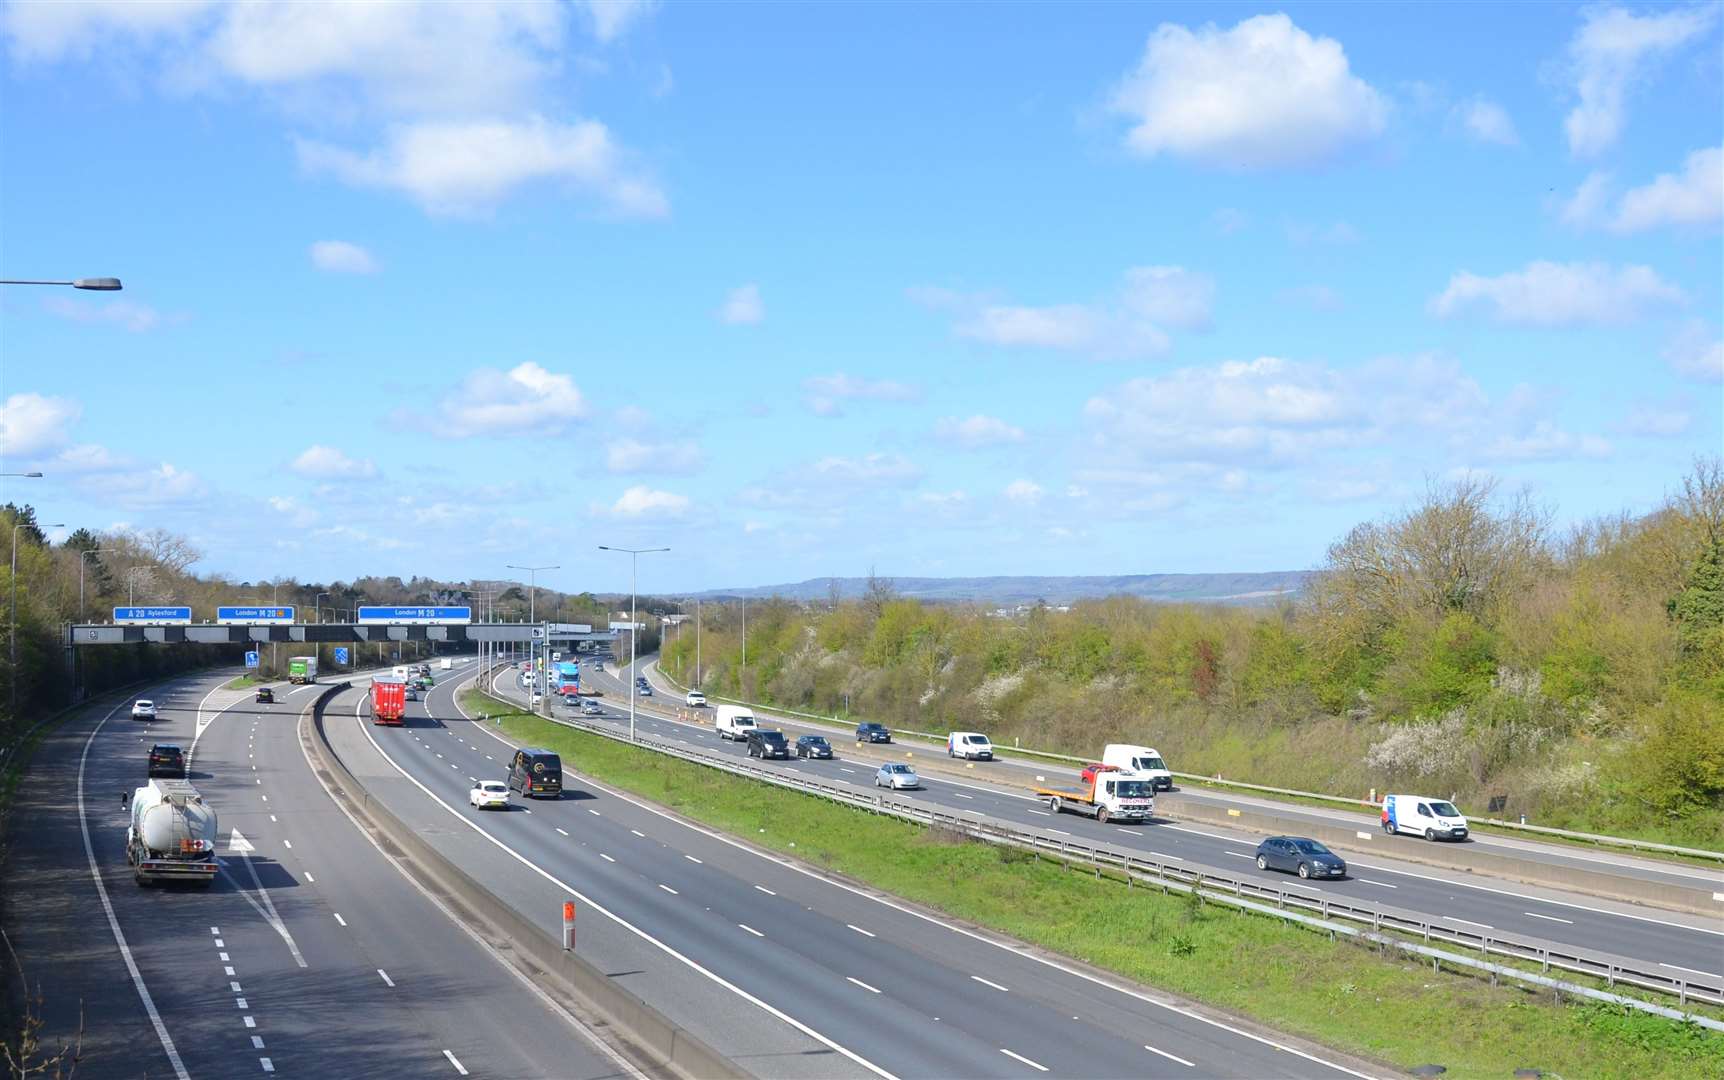 The view westbound along the M20 at Aylesford before construction began